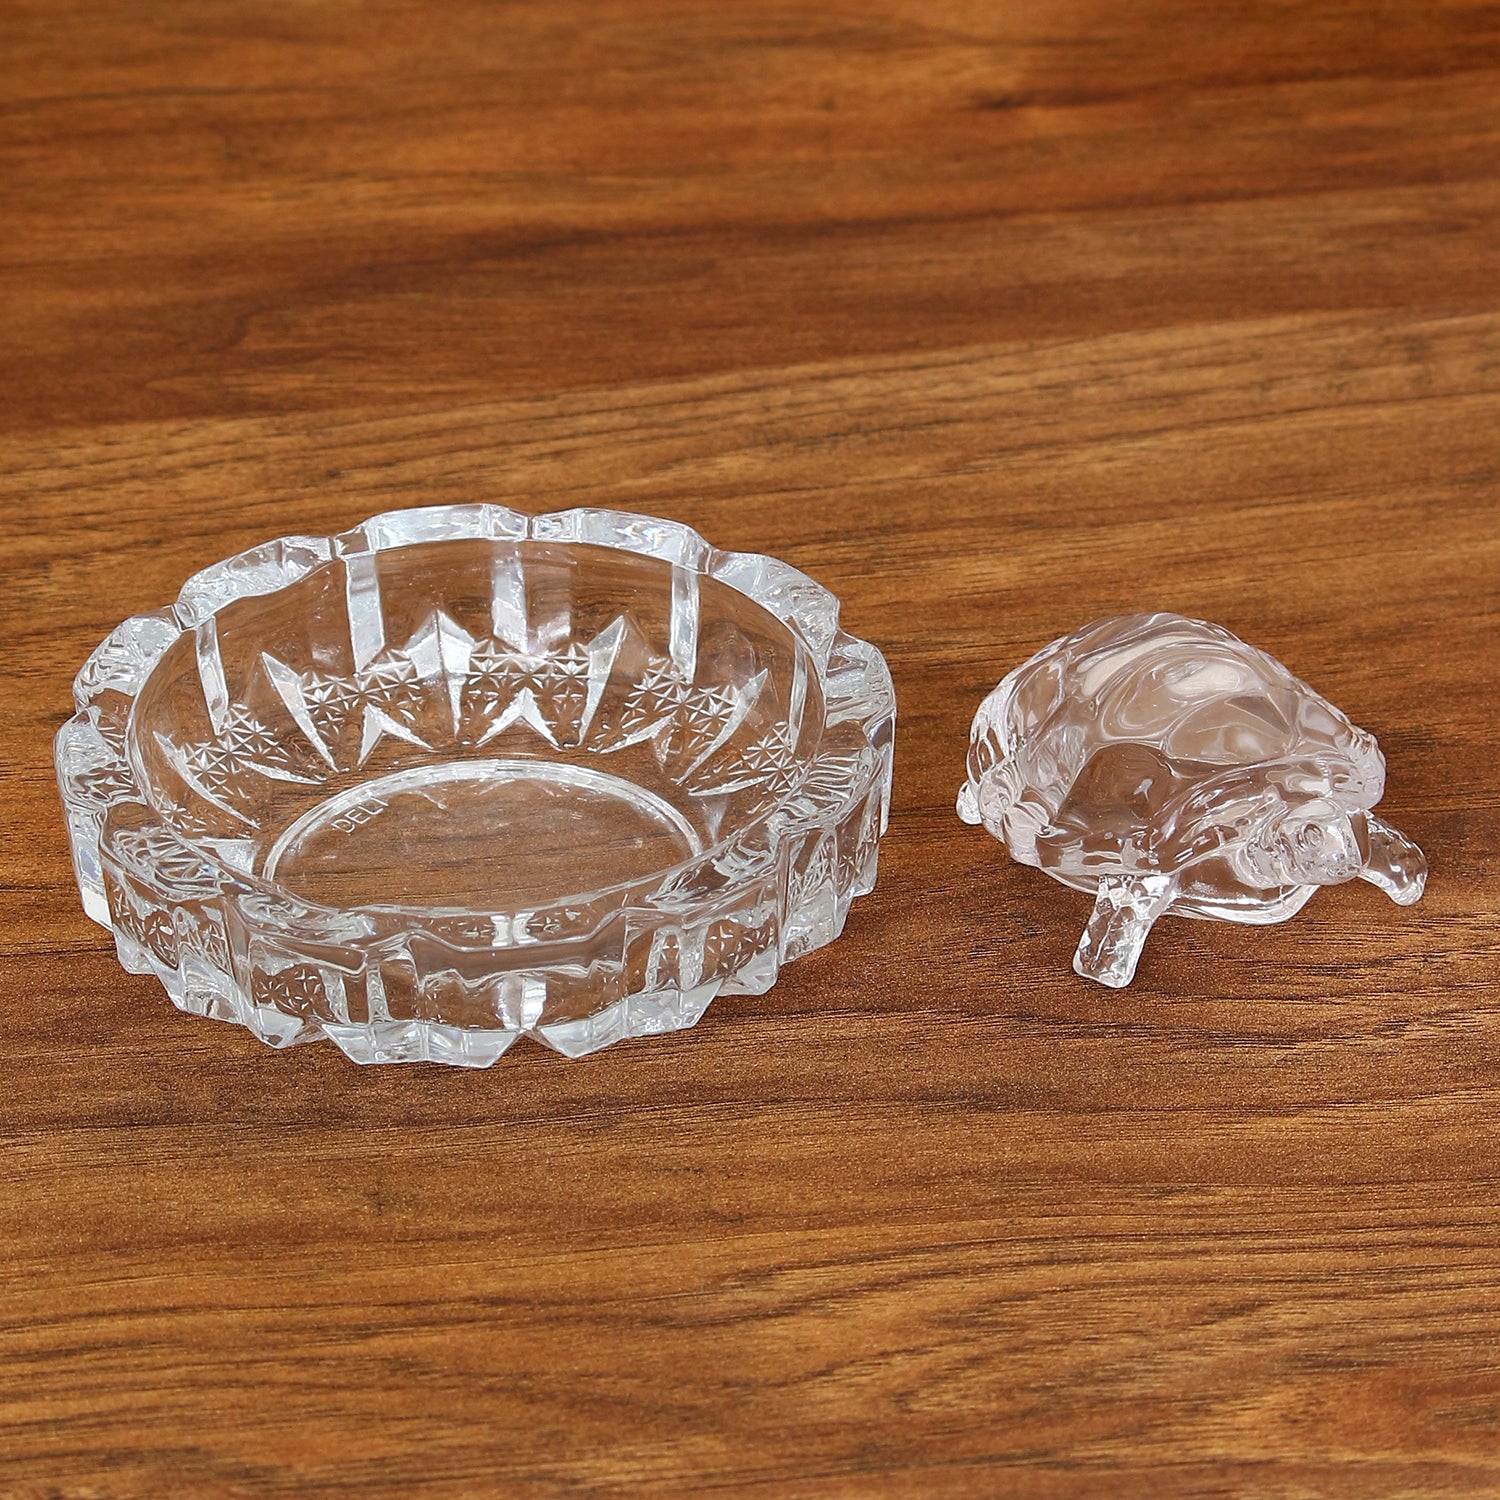 Decorative Feng-Shui White Crystal tortoise statue with Plate for Office Desks and Home 1